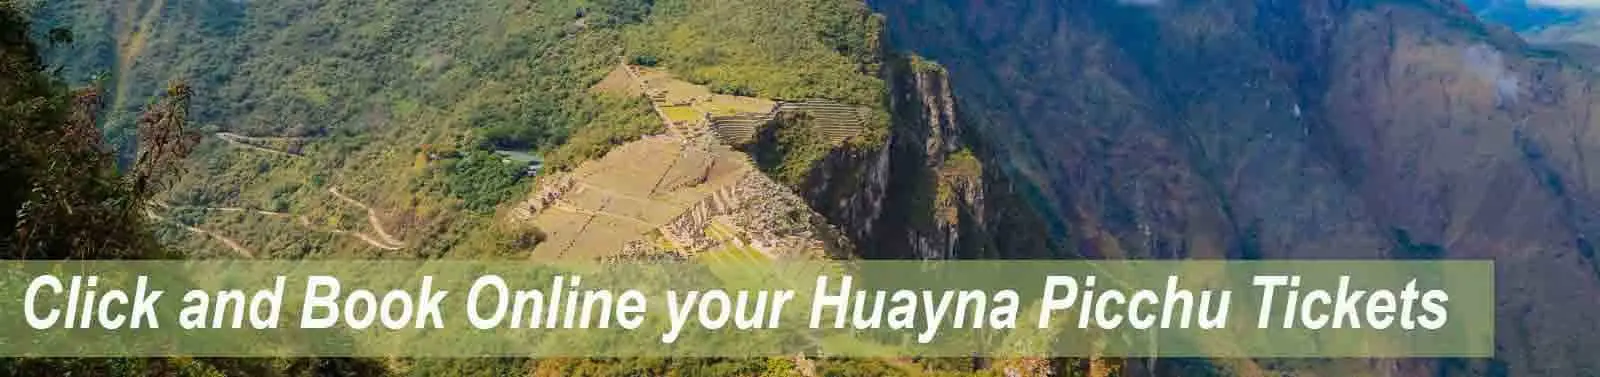 Book Online the Huayna Picchu tickets